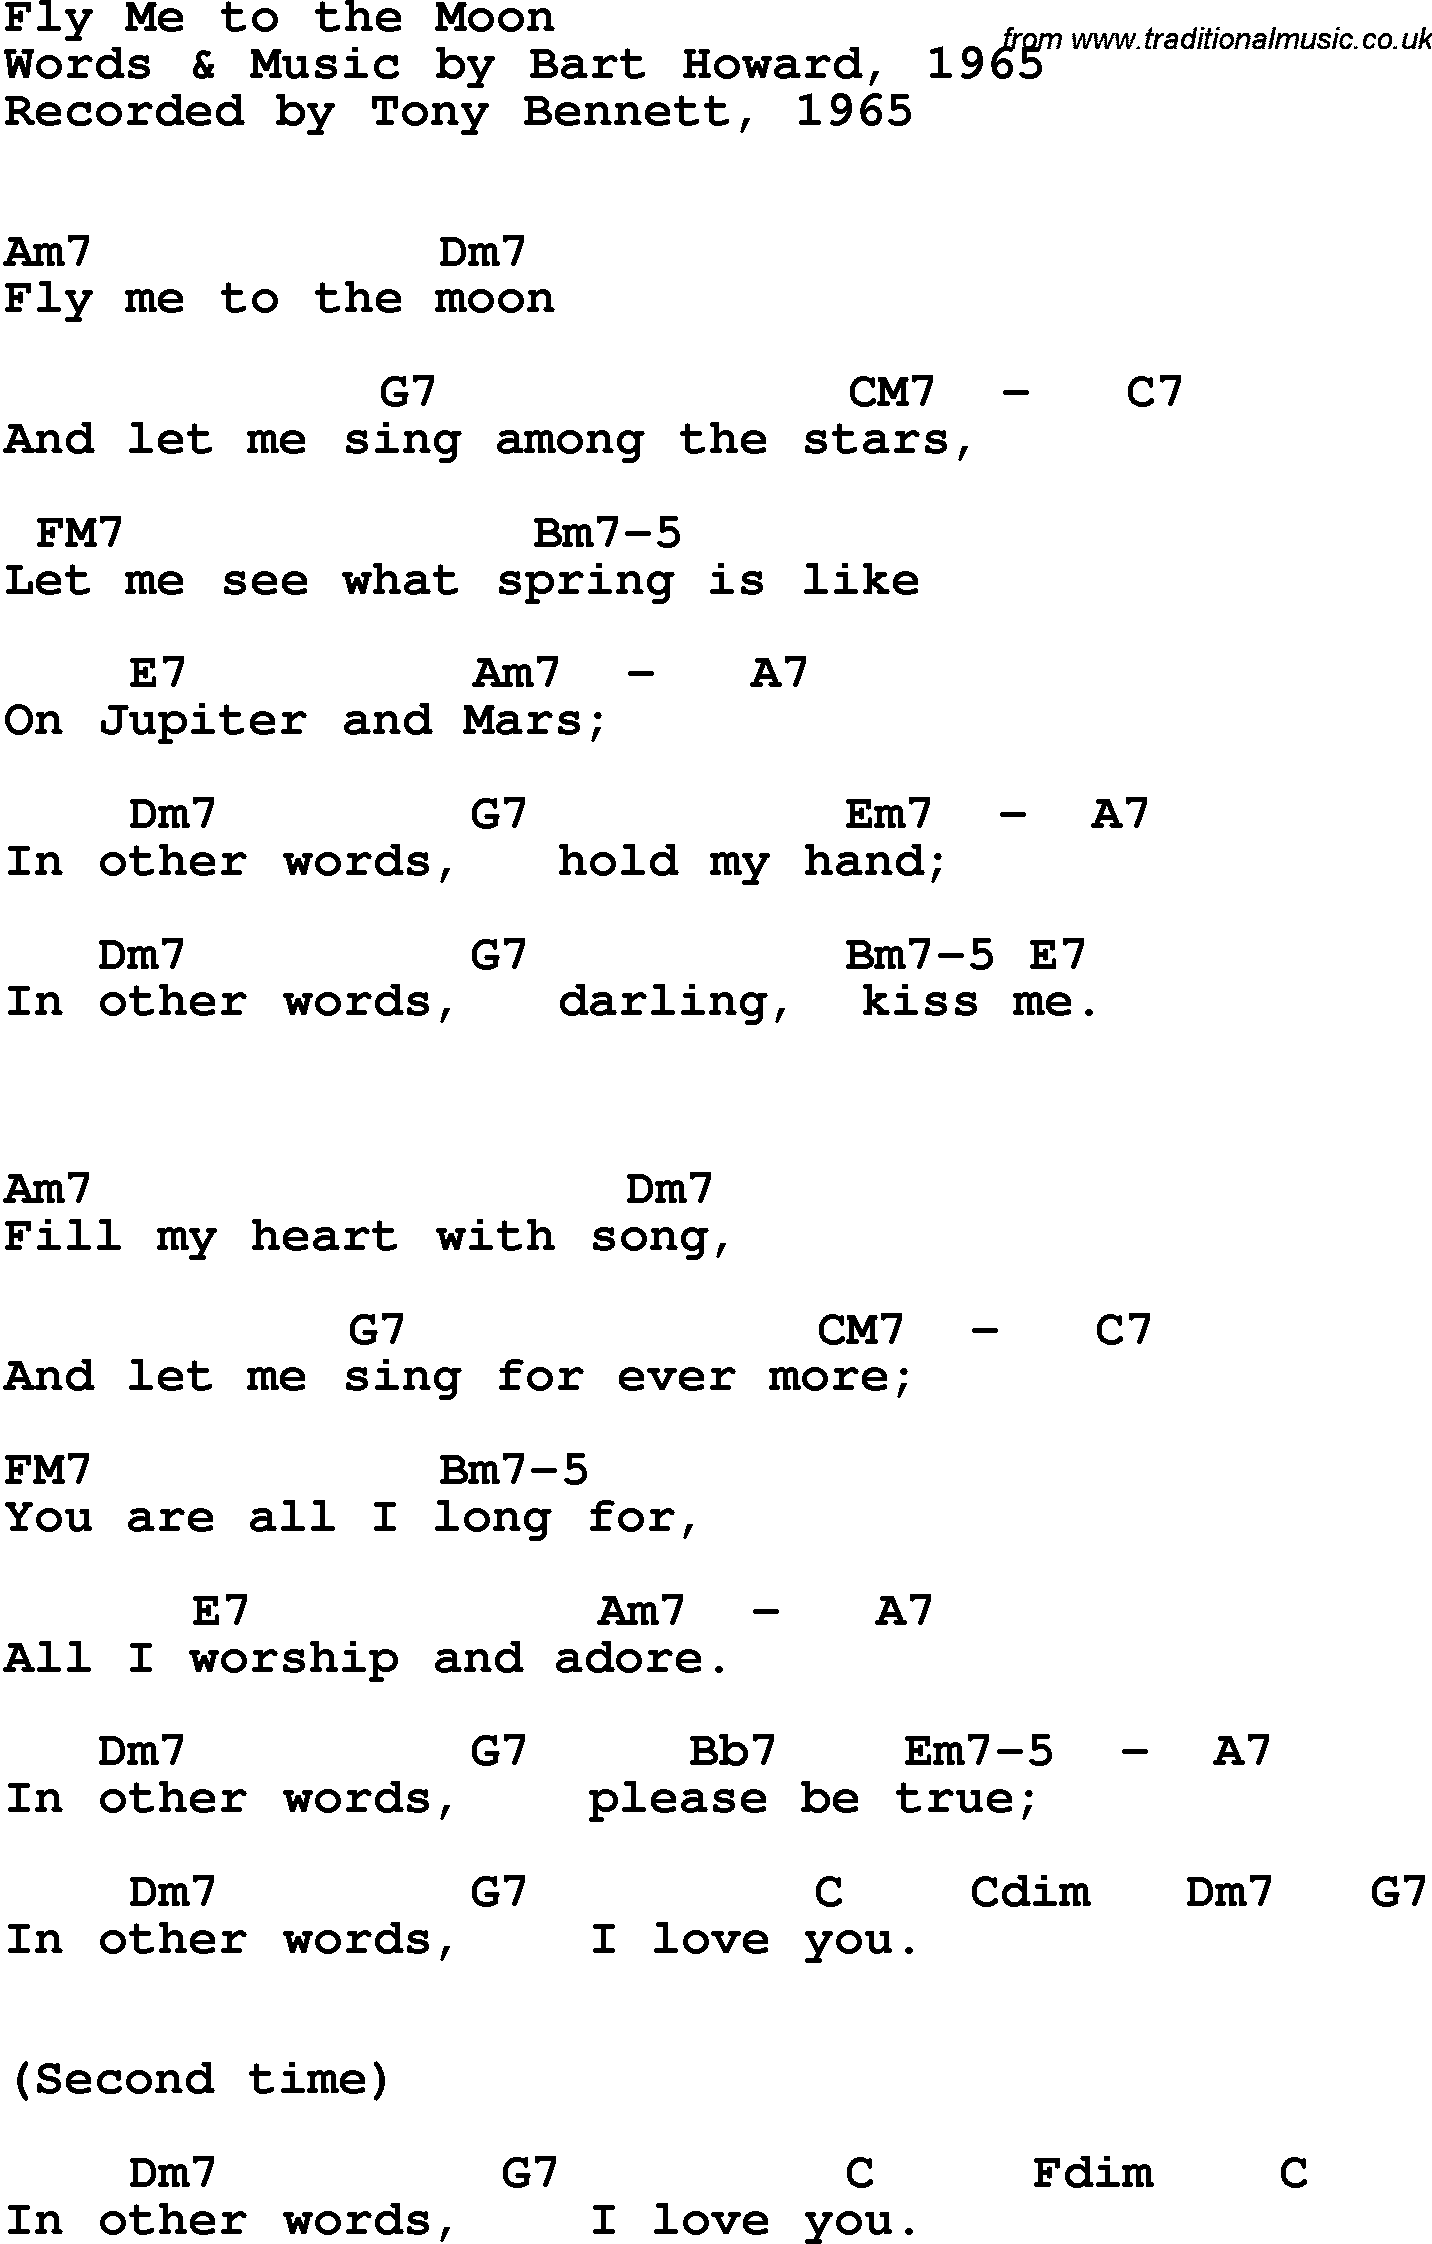 Song Lyrics with guitar chords for Fly Me To The Moon - Tony Bennett, 1965